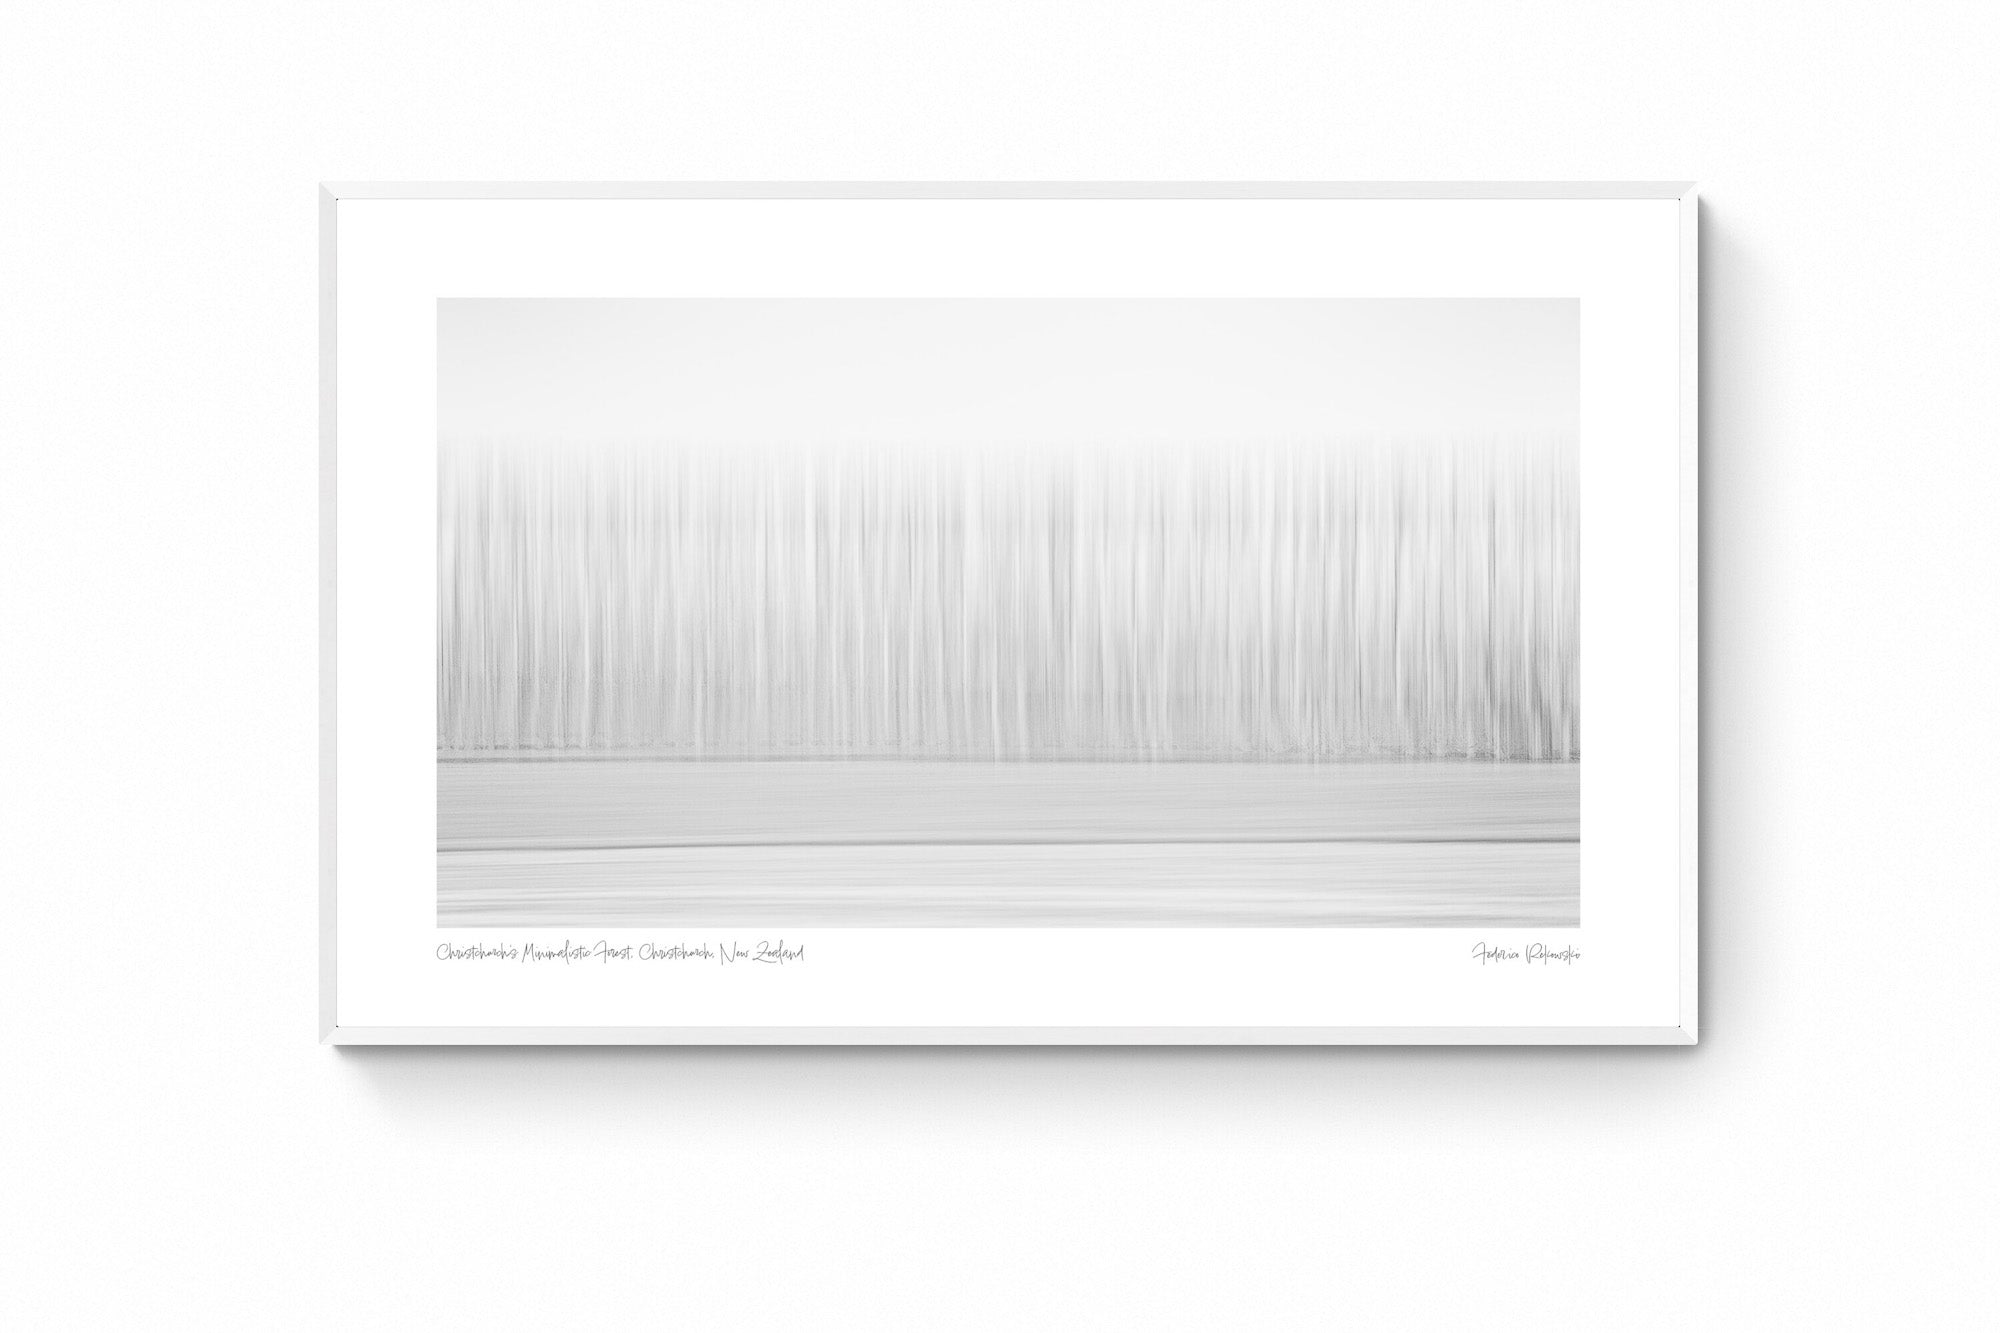 Abstract minimalist representation of a forest in Christchurch, New Zealand, with tree-like vertical lines in a gradient of white to gray.